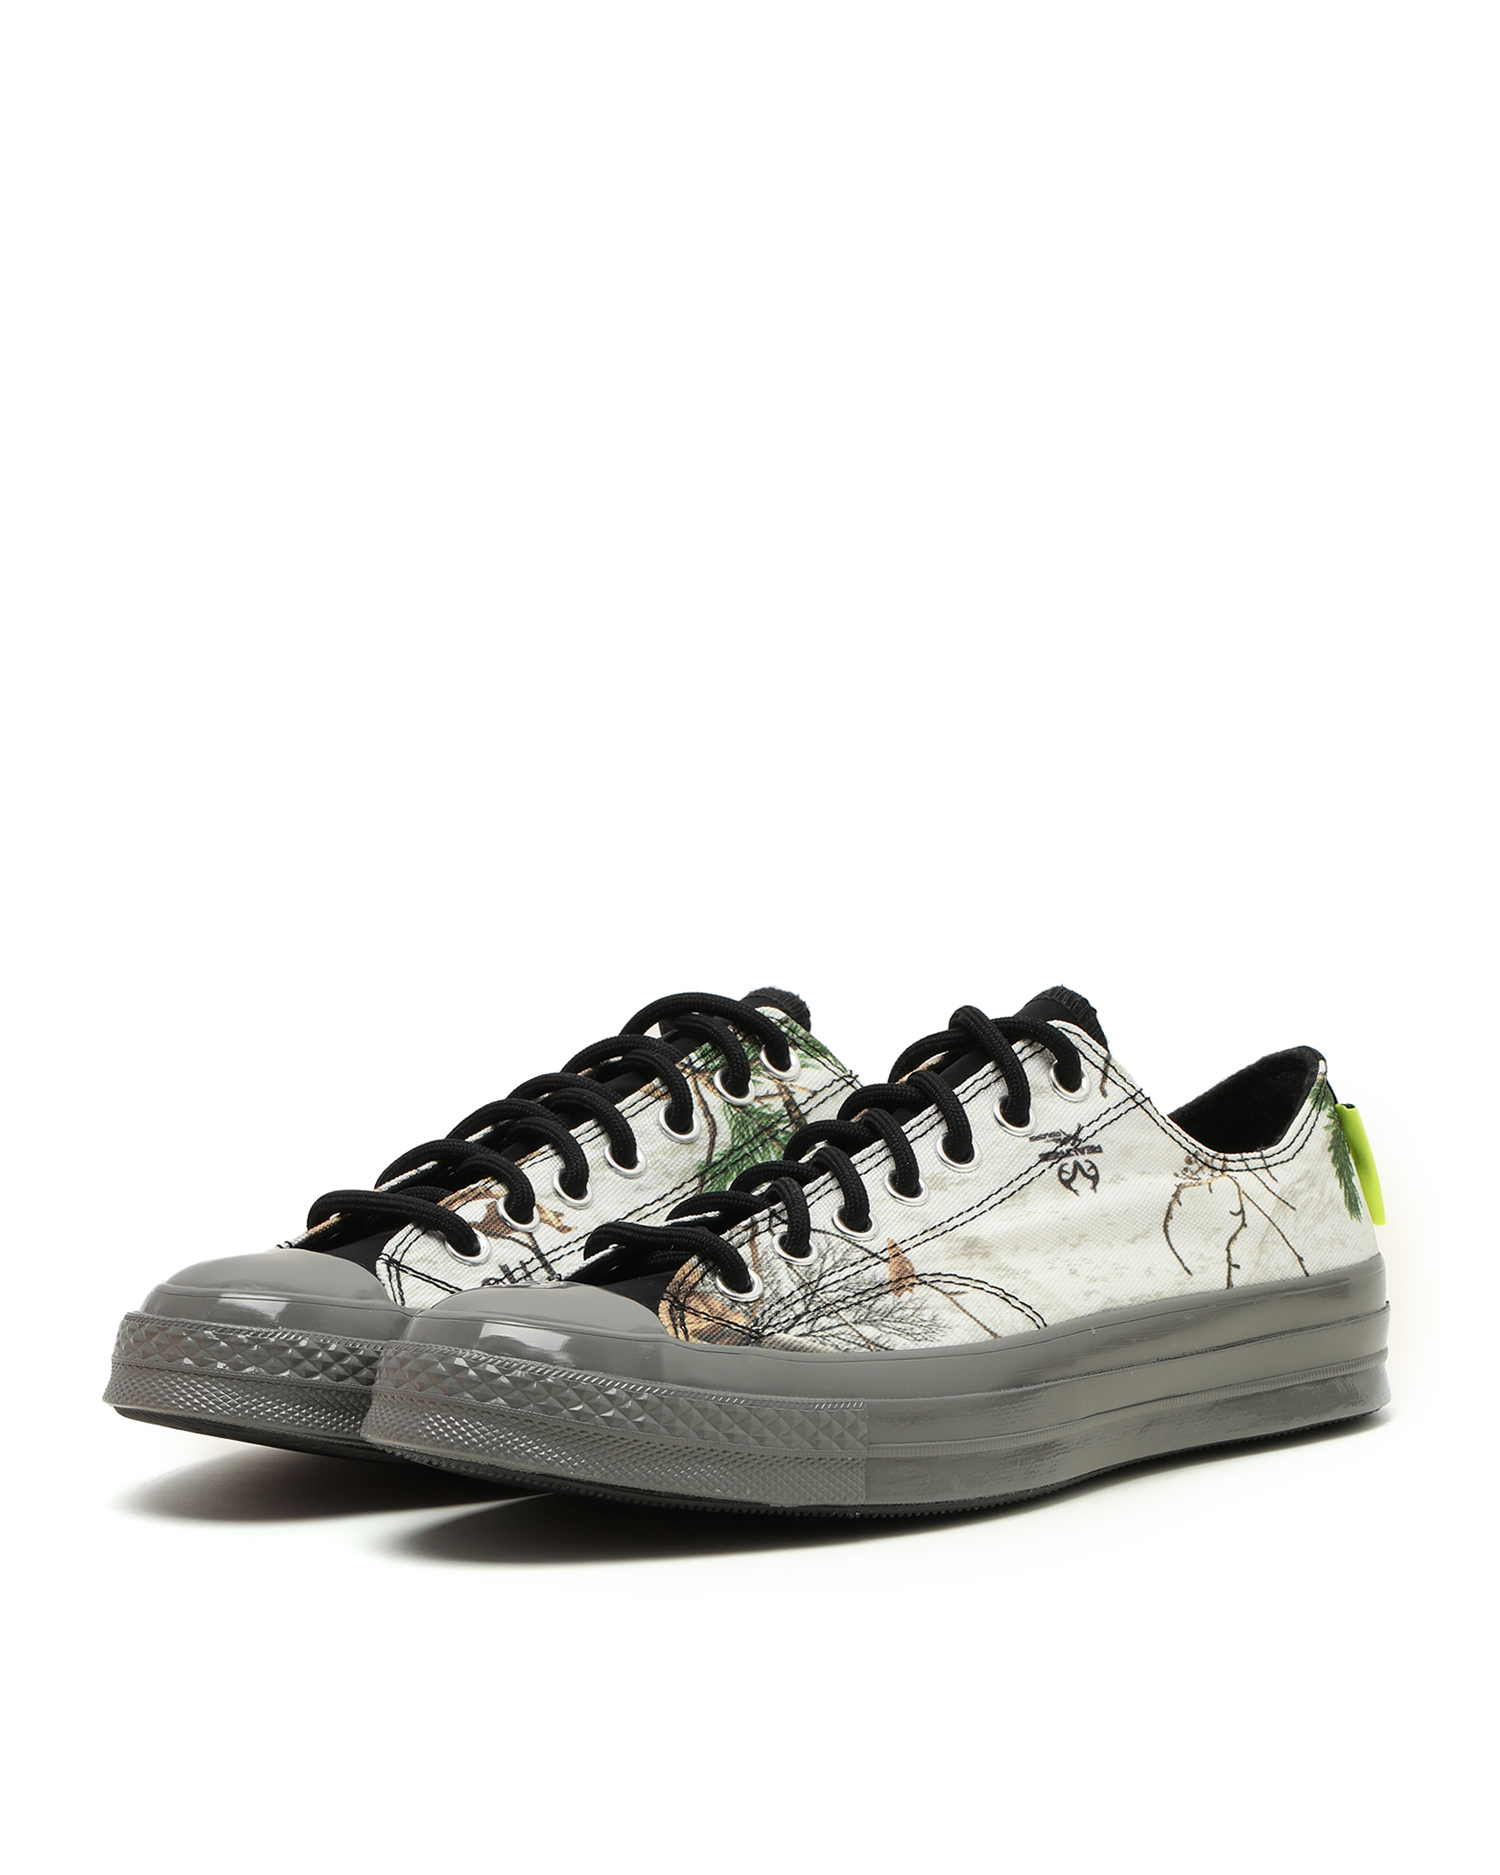 CONVERSE Chuck 70 GORE-TEX Low sneakers